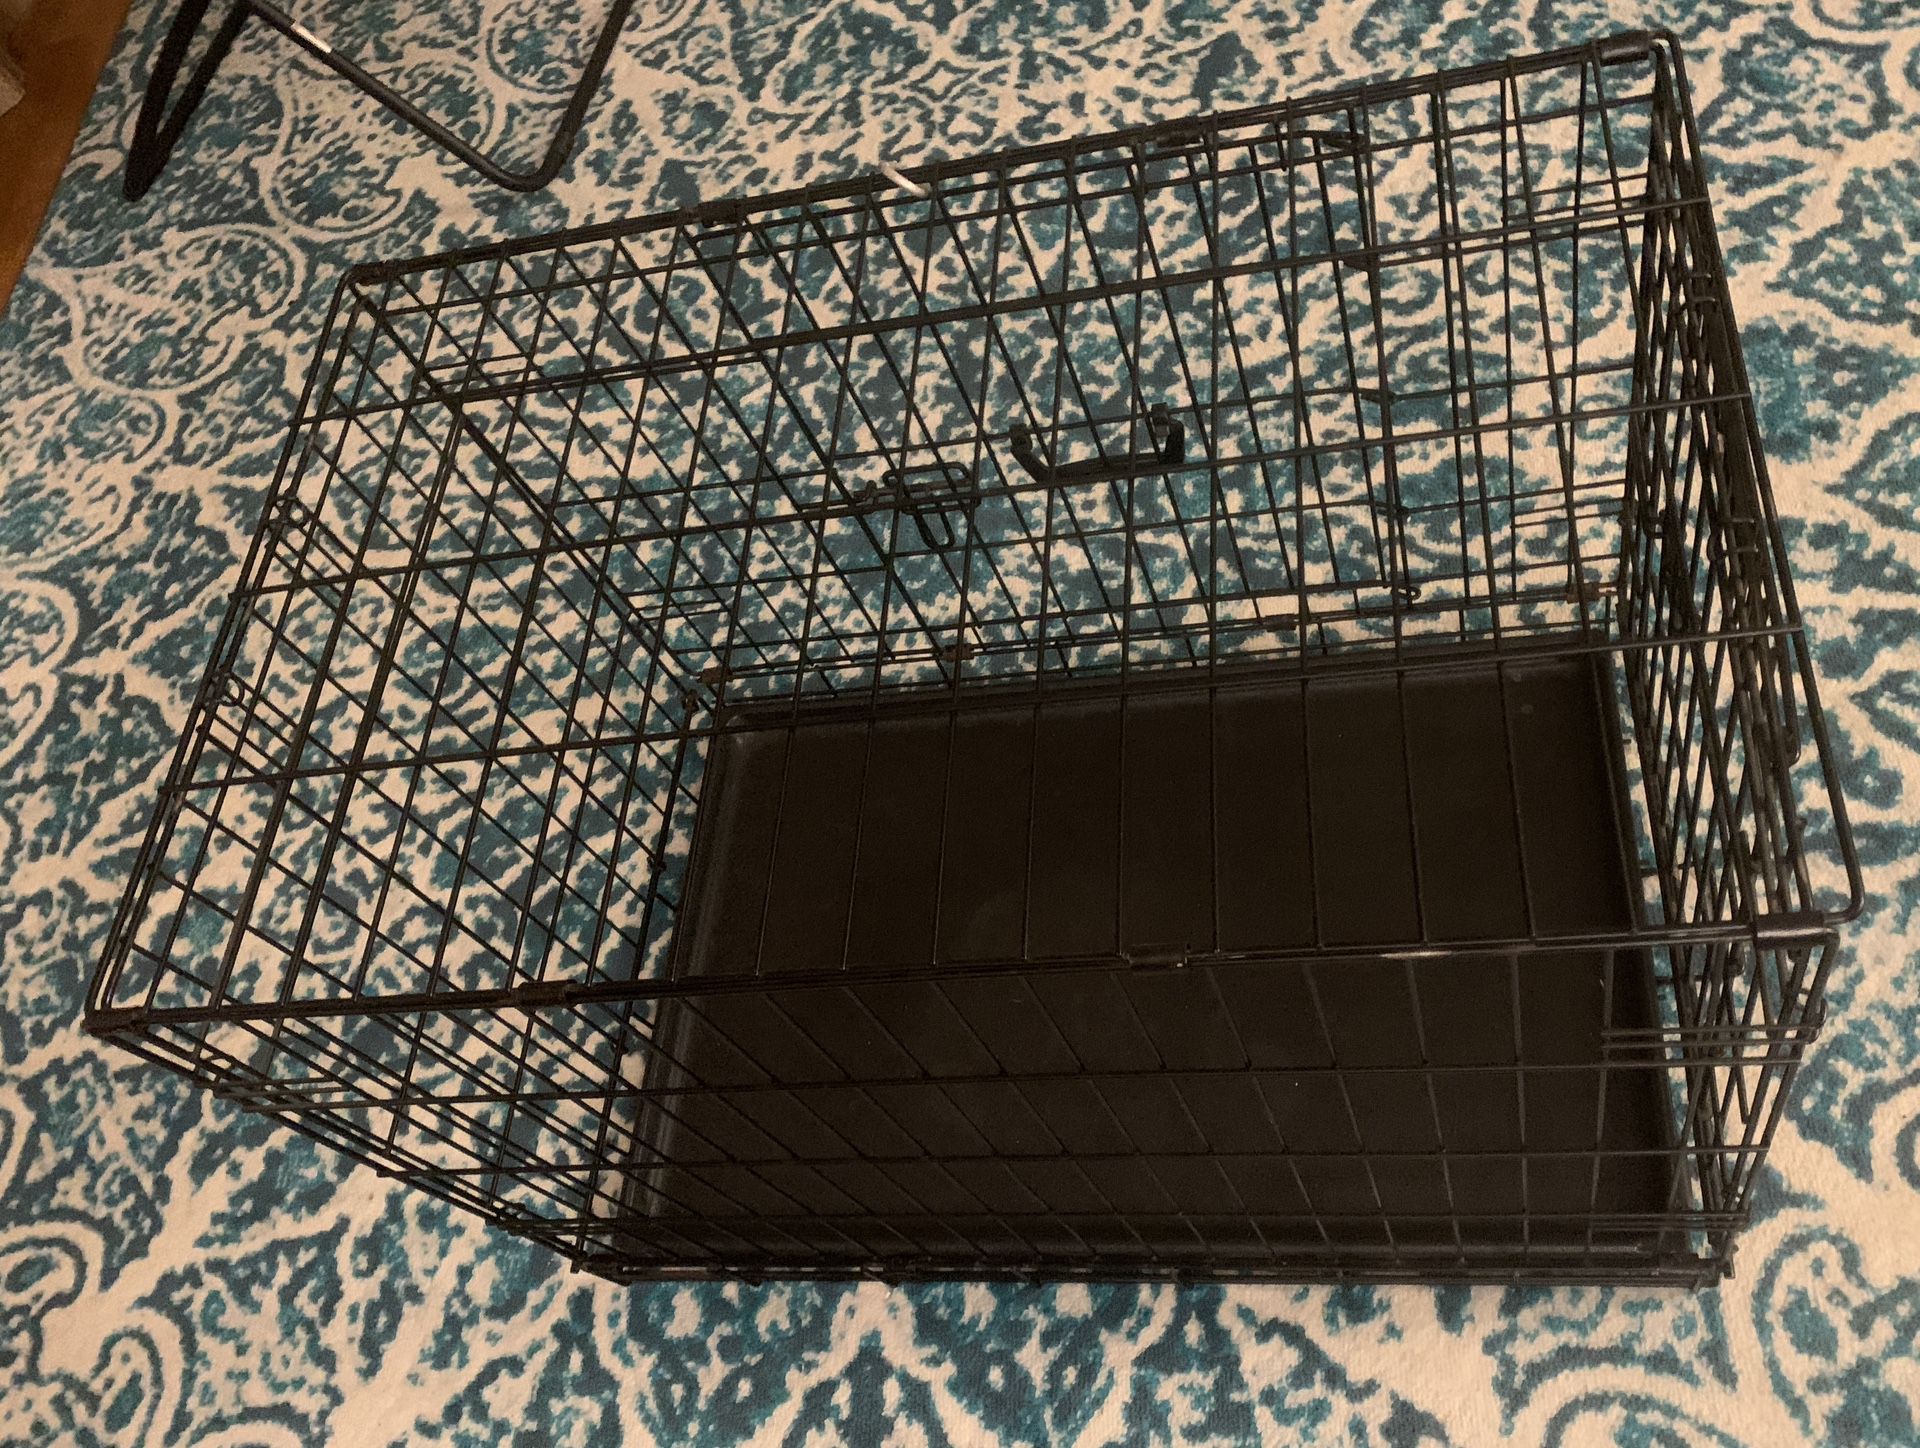 Dog Pet Crate Cage